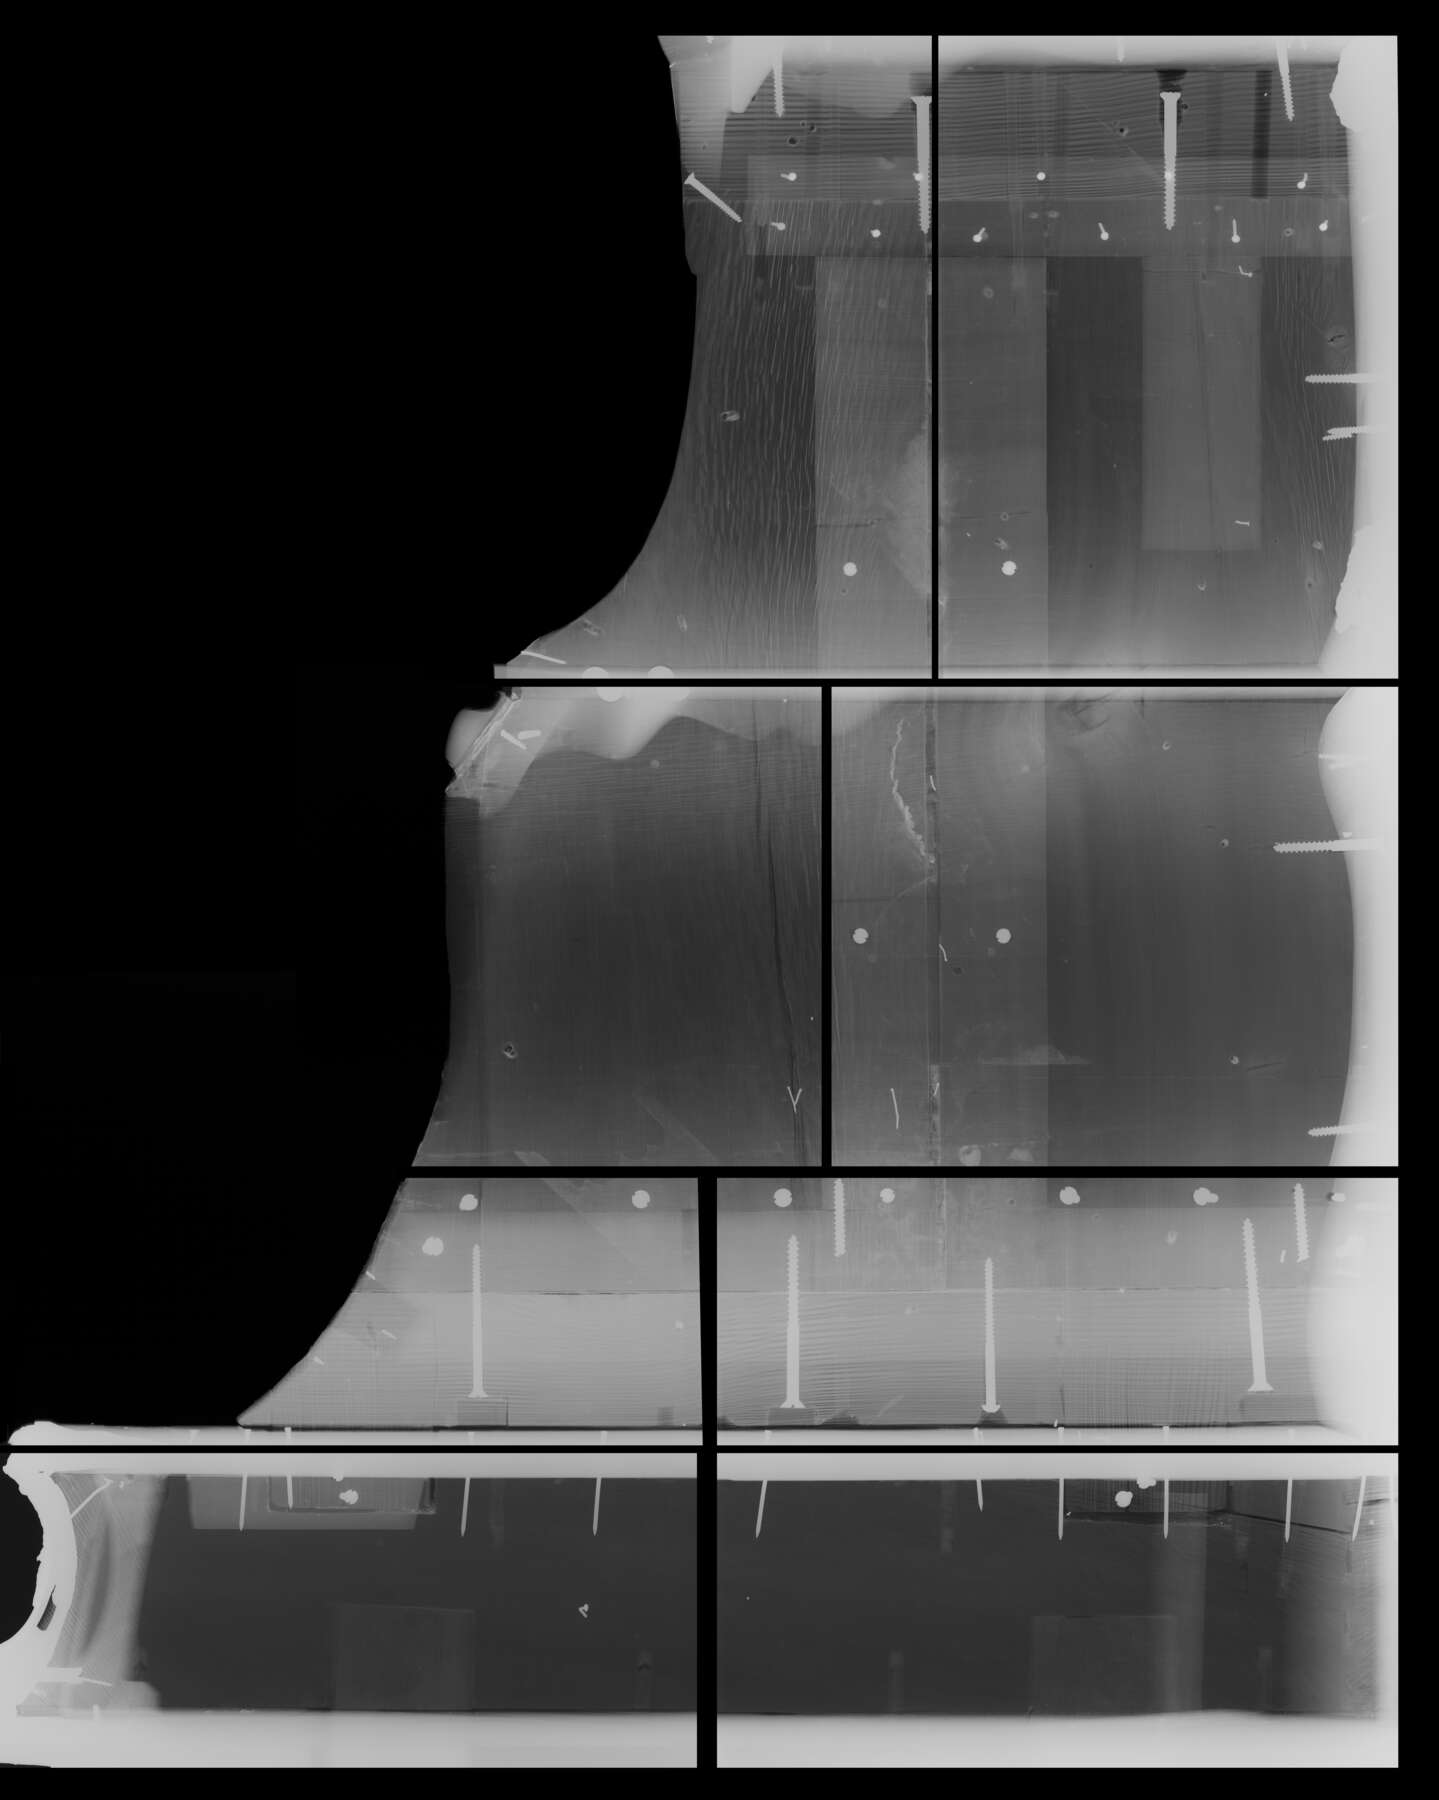 black-and-white x-ray of the top portion of the corner cabinet, revealing numerous screws throughout the interior